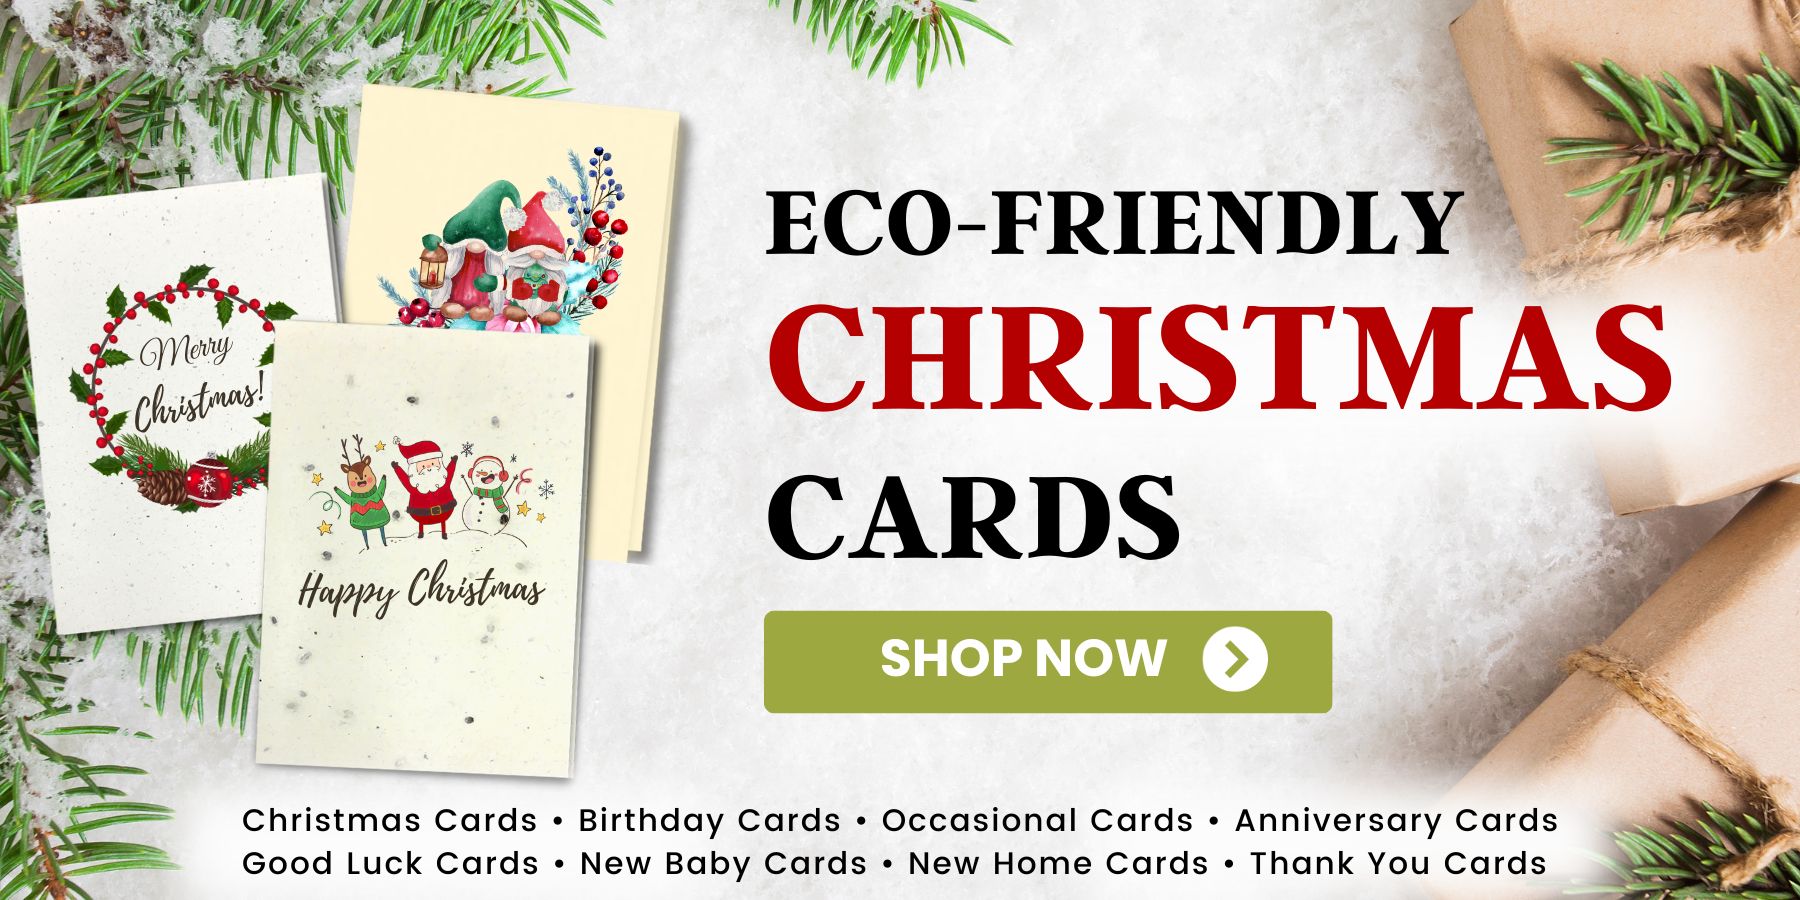 Earthbits Christmas Cards eco friendly made of seeded paper, coffee paper, elephant poo paper, tea paper, lemongrass paper, cotton paper